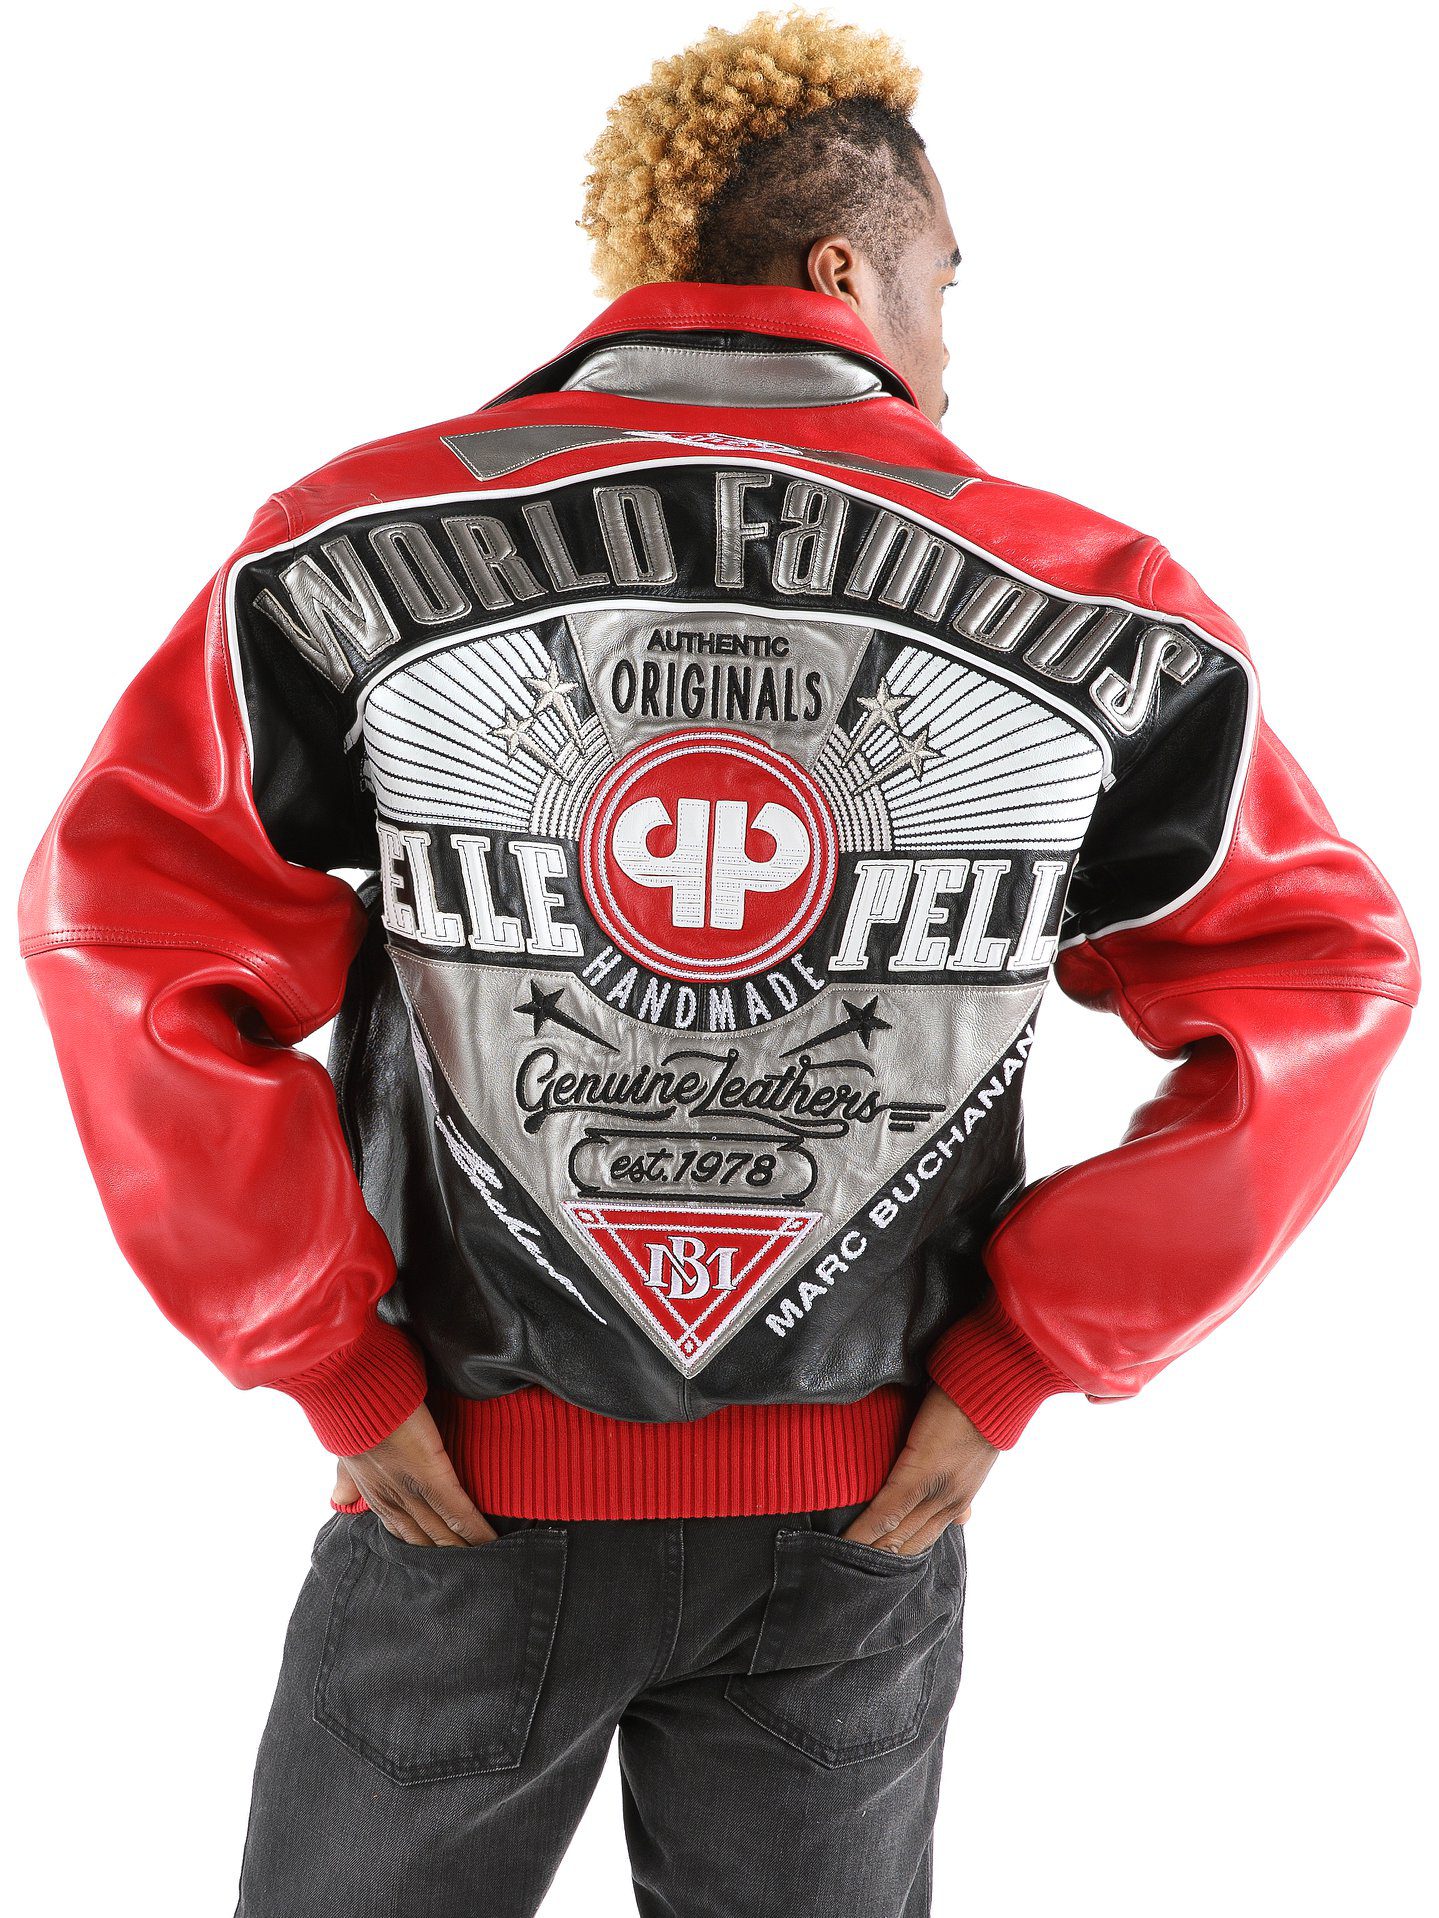 Red Pelle Pelle World Famous Leather Jacket